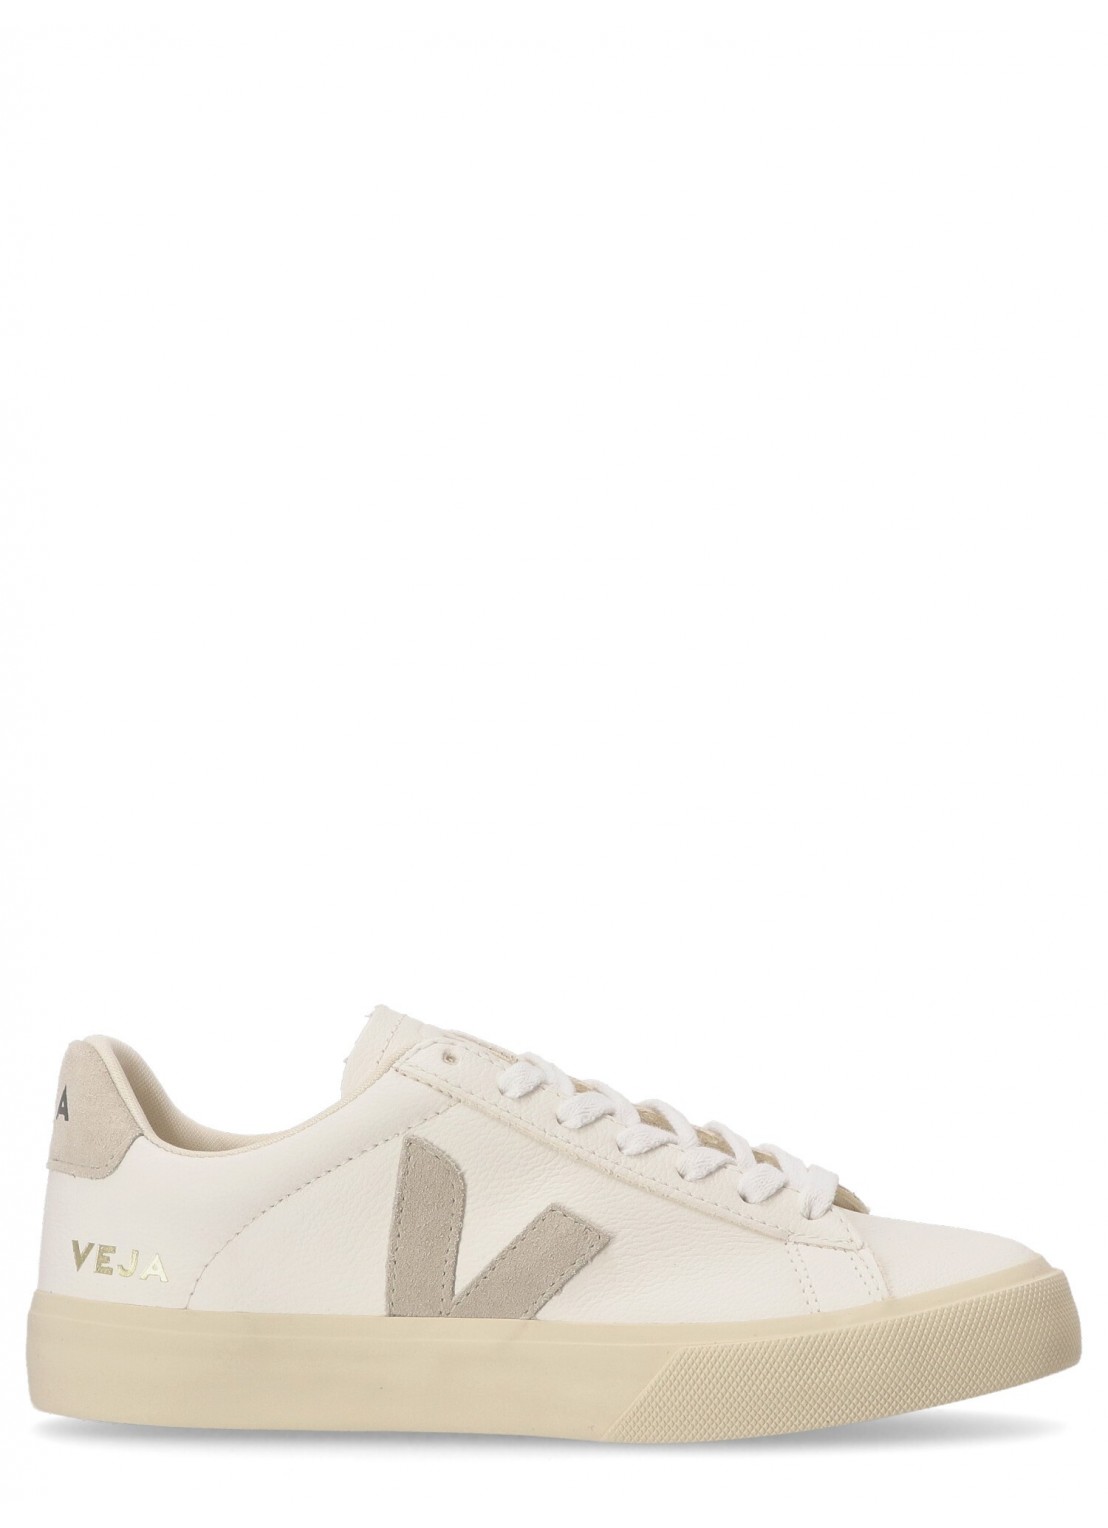 Sneaker veja sneaker woman campo cp0502429 extra white natural suede talla 41
 